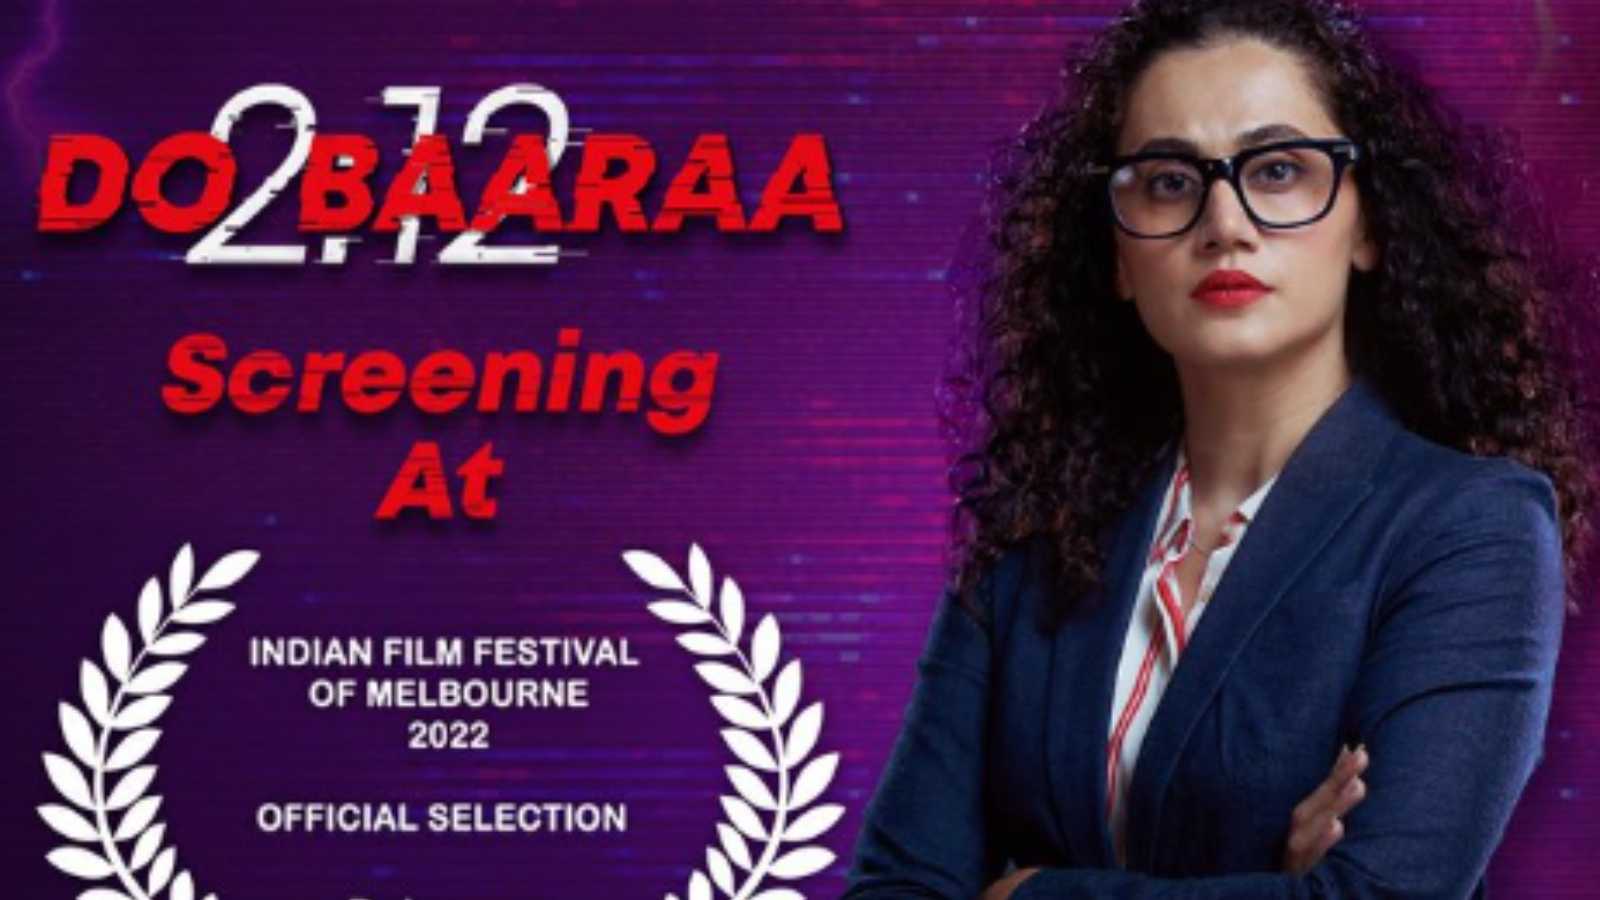 Time will stop in Melbourne! Taapsee Pannu & Anurag Kashyap’s Dobaaraa is all set to screen at the Film Festival of Melbourne